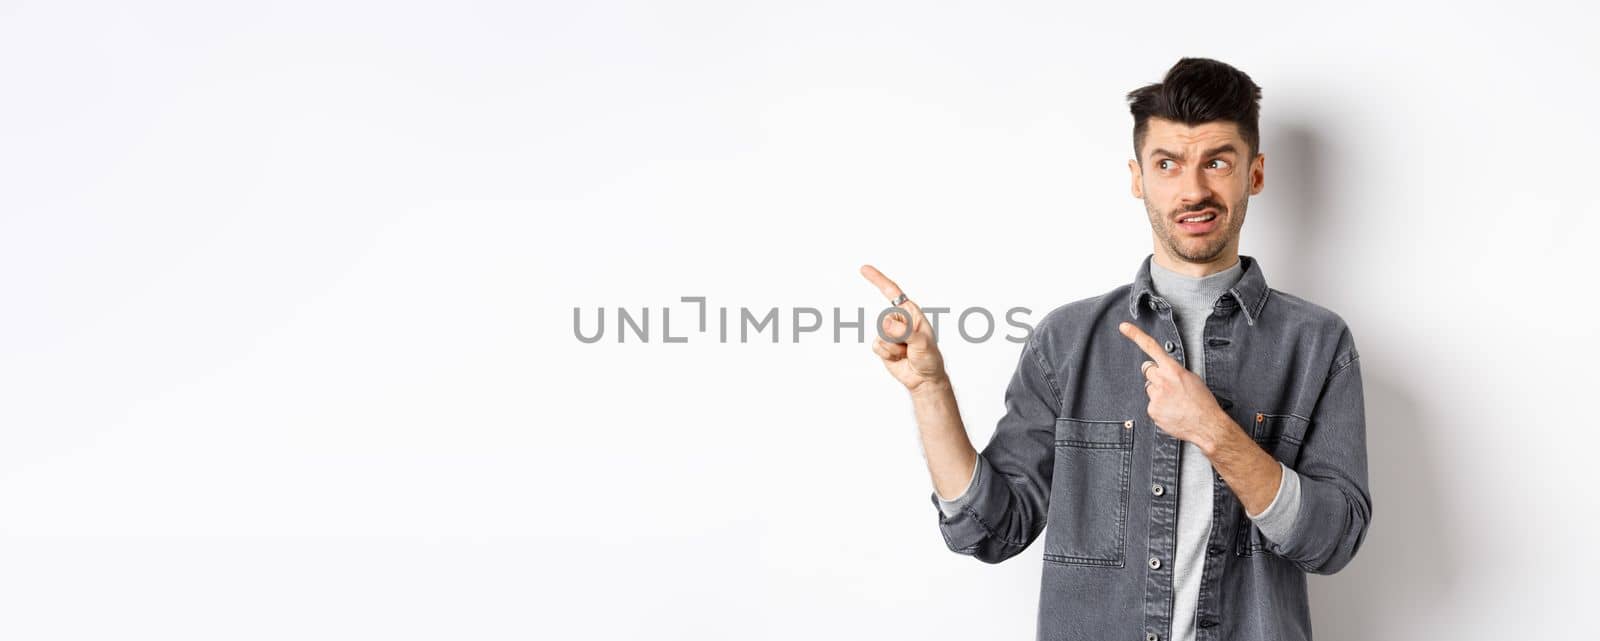 Skeptical and doubtful young man pointing fingers left at logo, look with dislike and confusion, standing on white background.